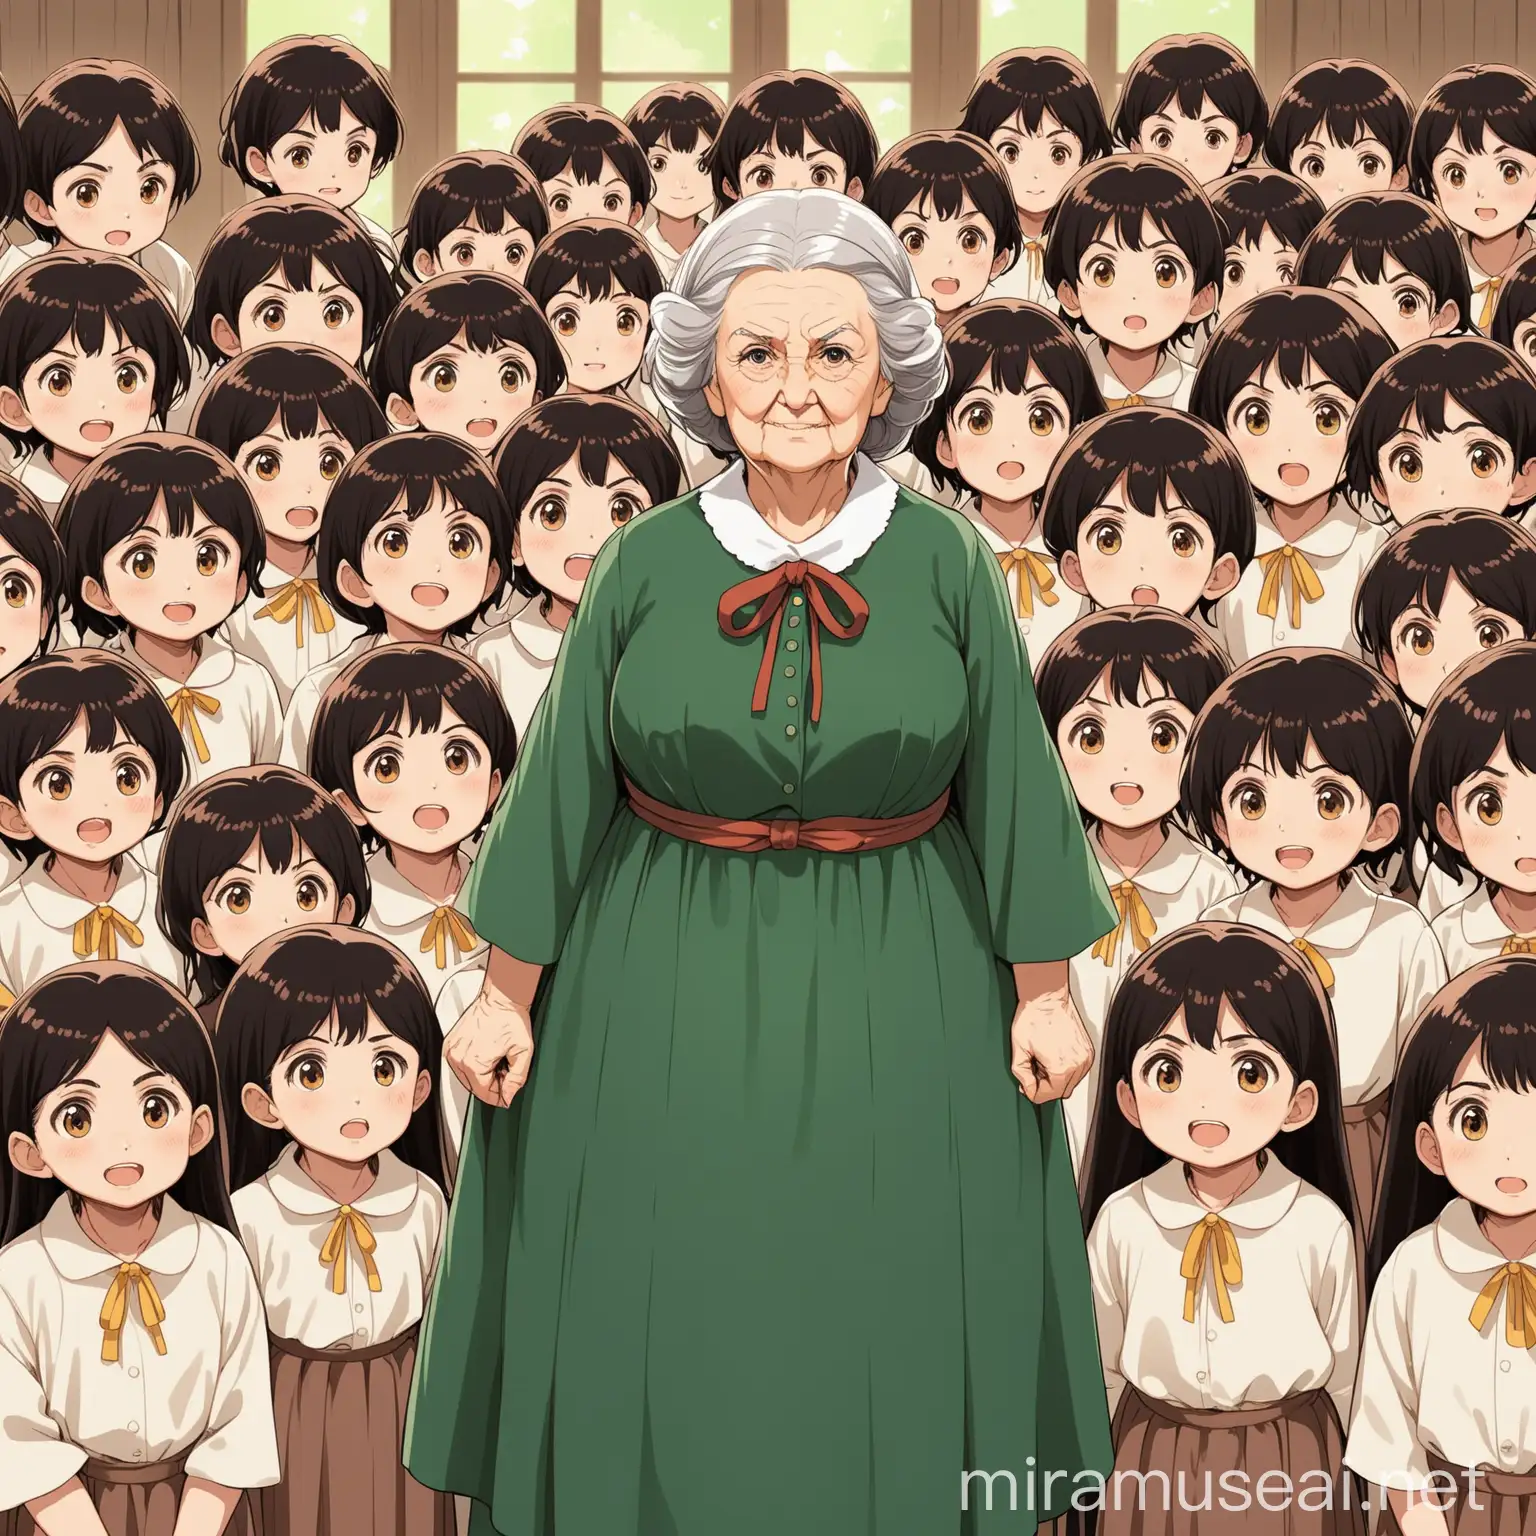 Old Maria Montessori standing around a lot of students in the style of studio Ghibli